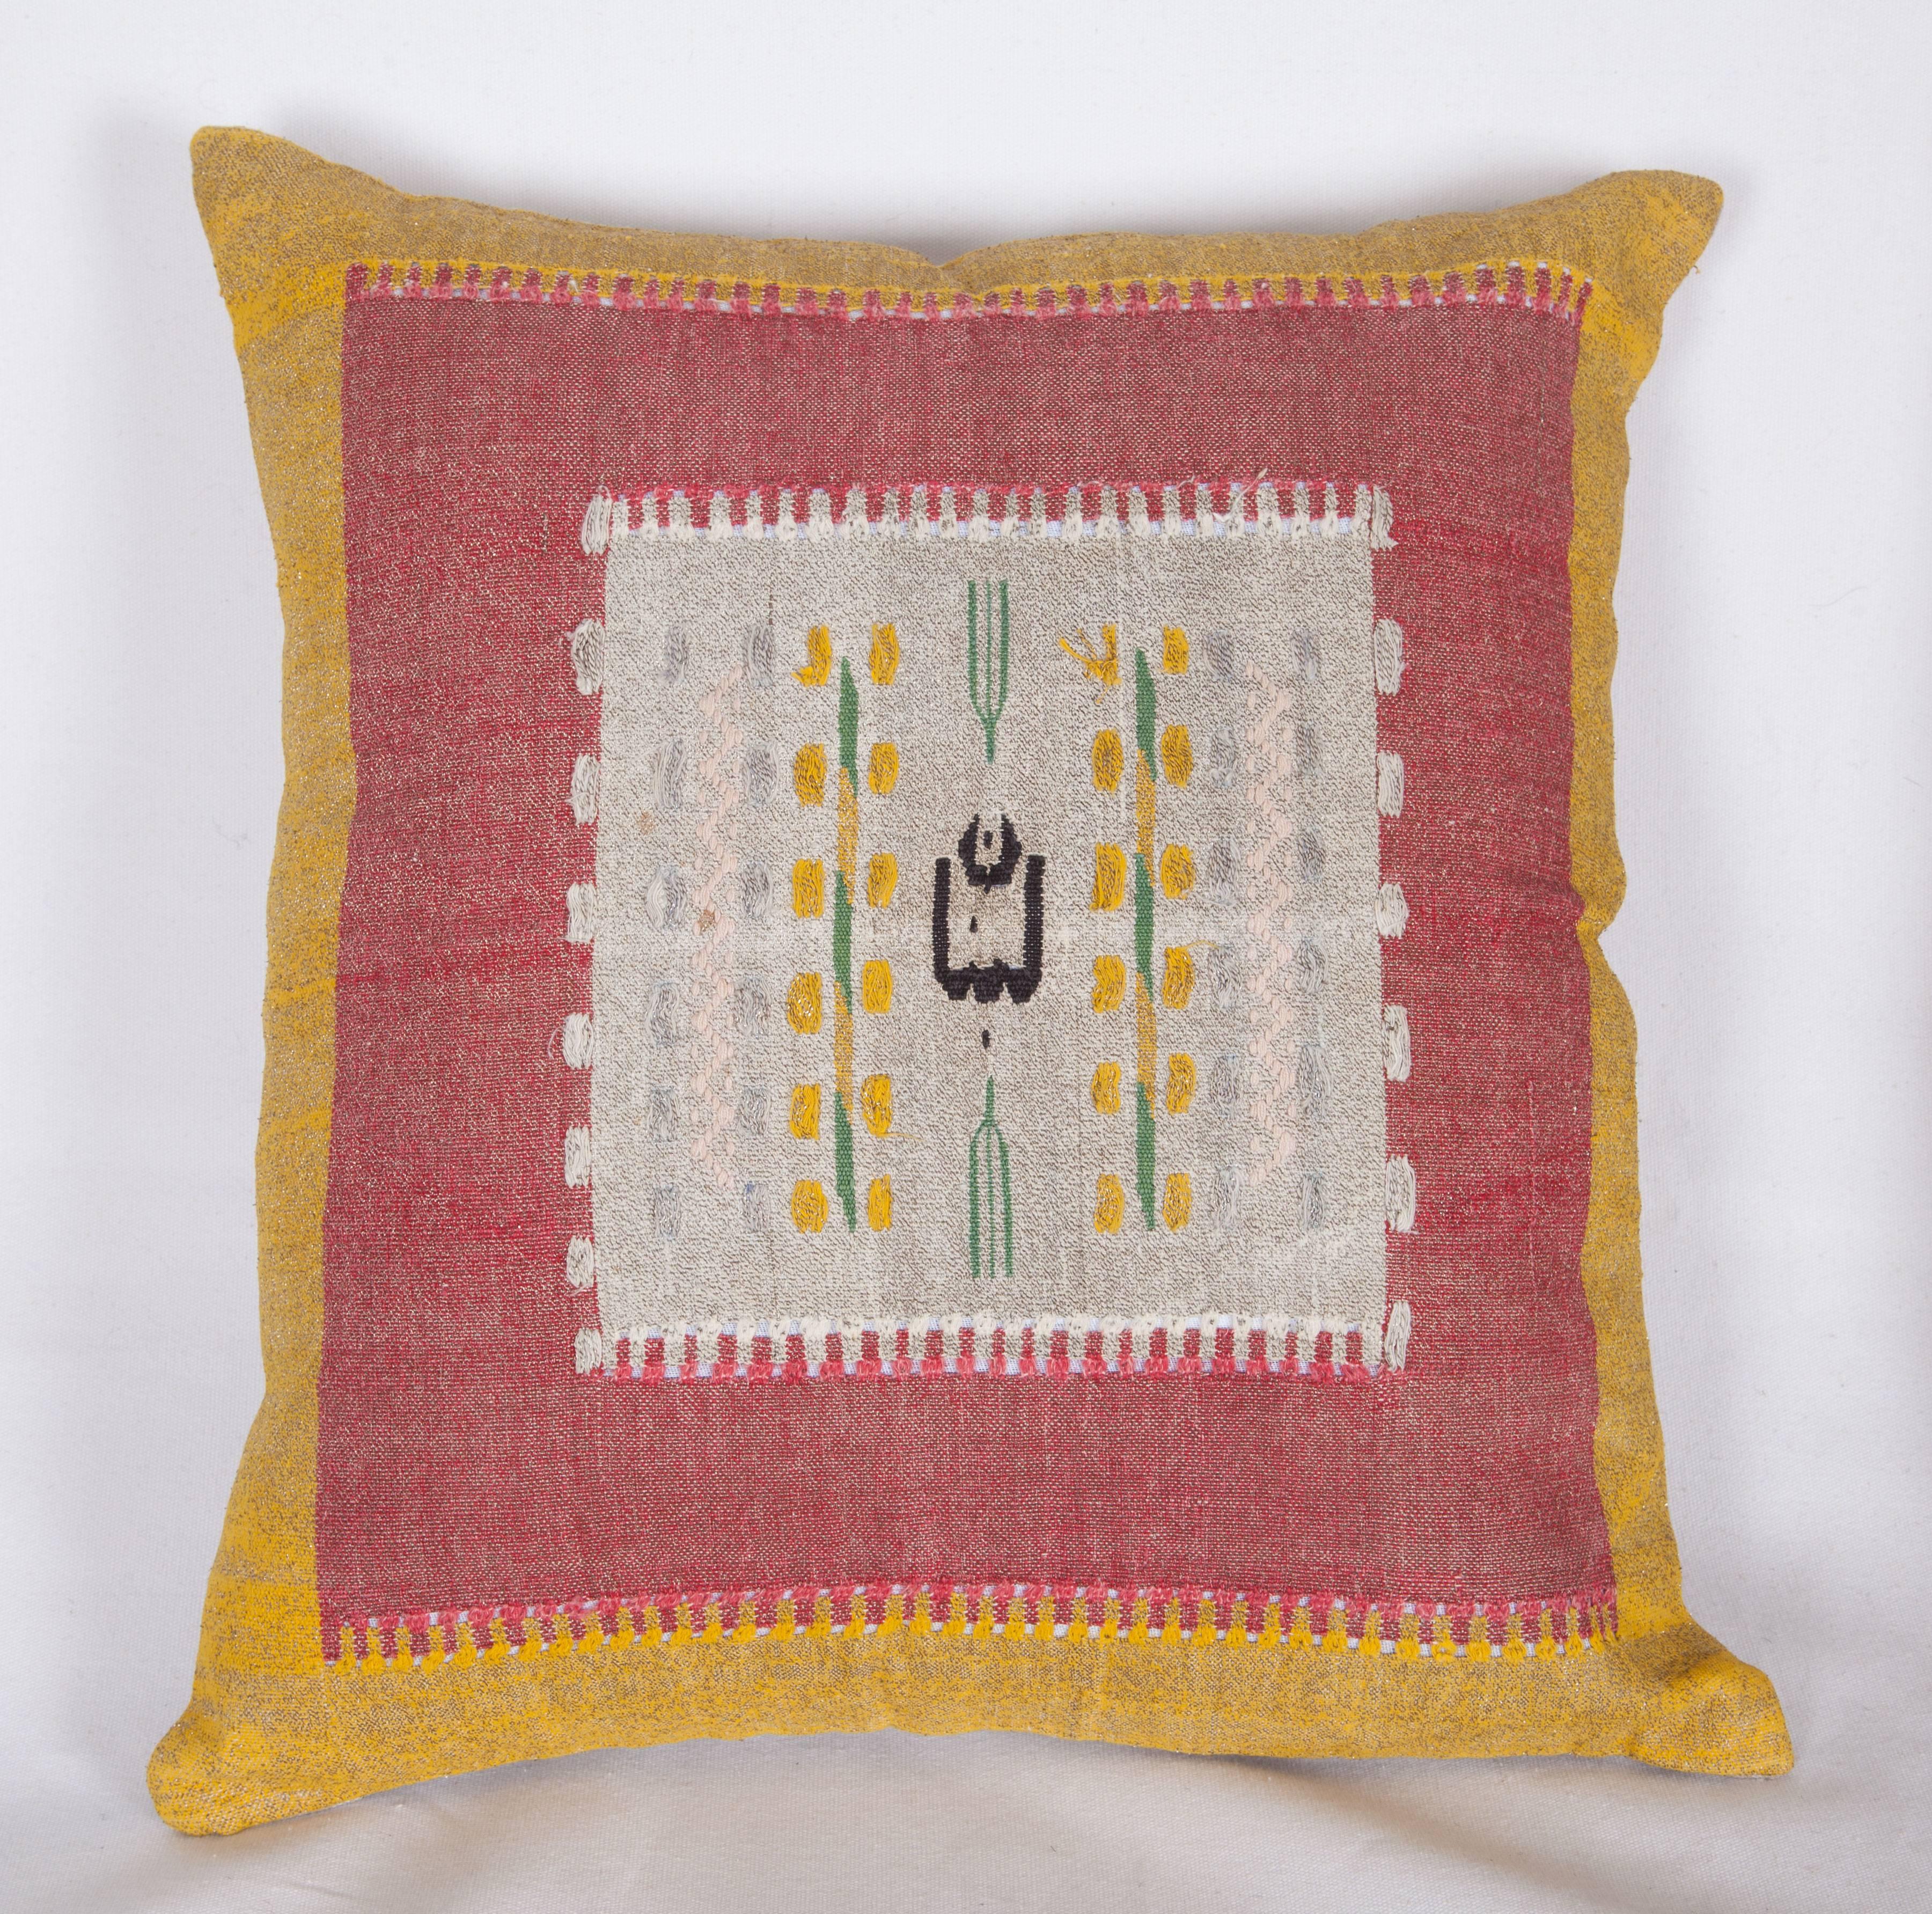 The pillows are made out of an early 20th century, Syrian pillow tops. It does not come with an insert but it comes with a bag made to the size and out of cotton to accommodate the filling. The backing is made of linen. Please note ' filling is not